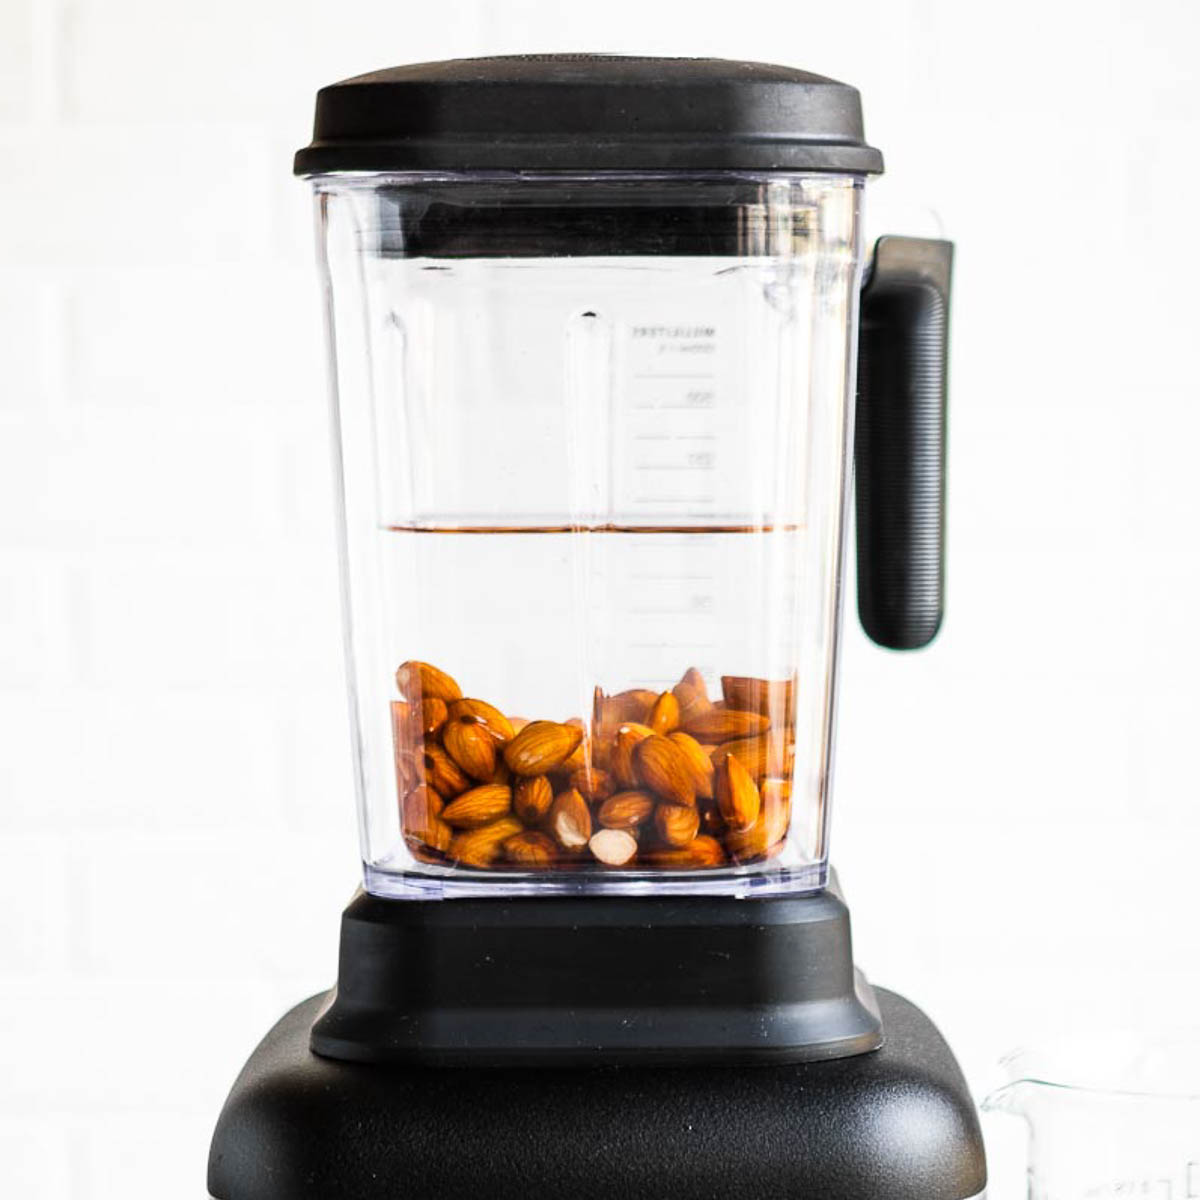 Blender with Almonds and water inside